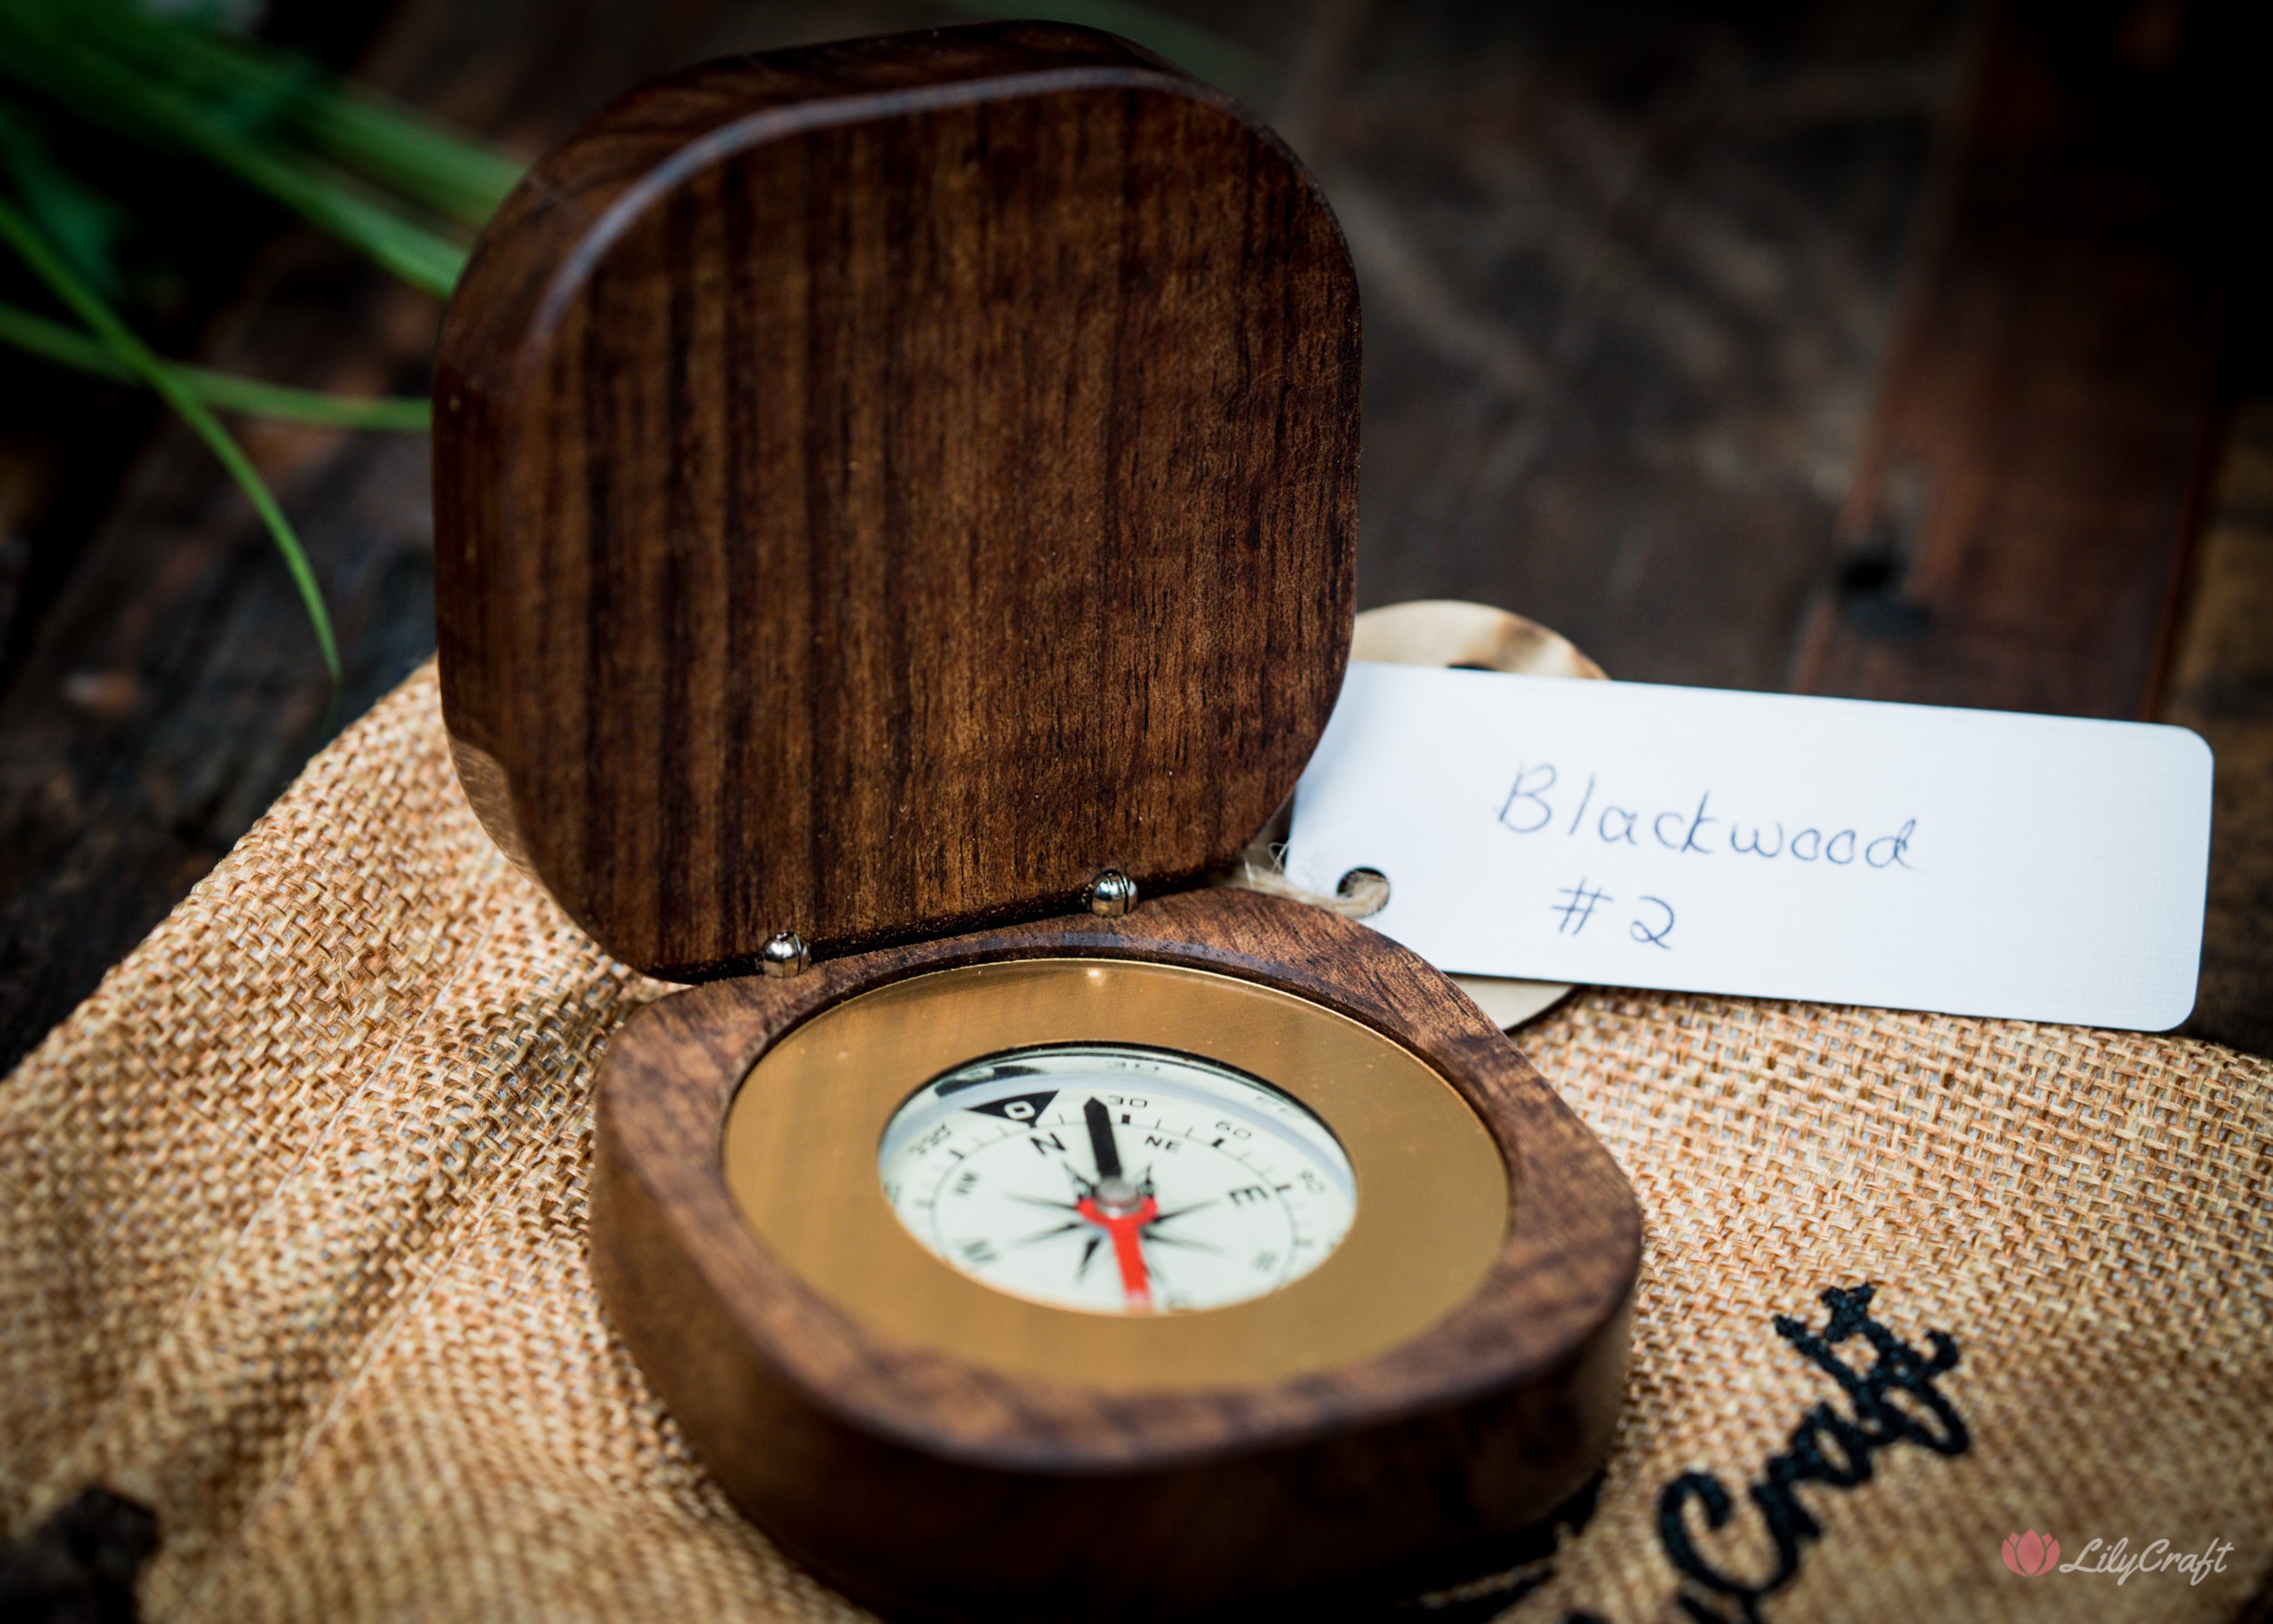 Retirement milestone commemorated with a bespoke compass.